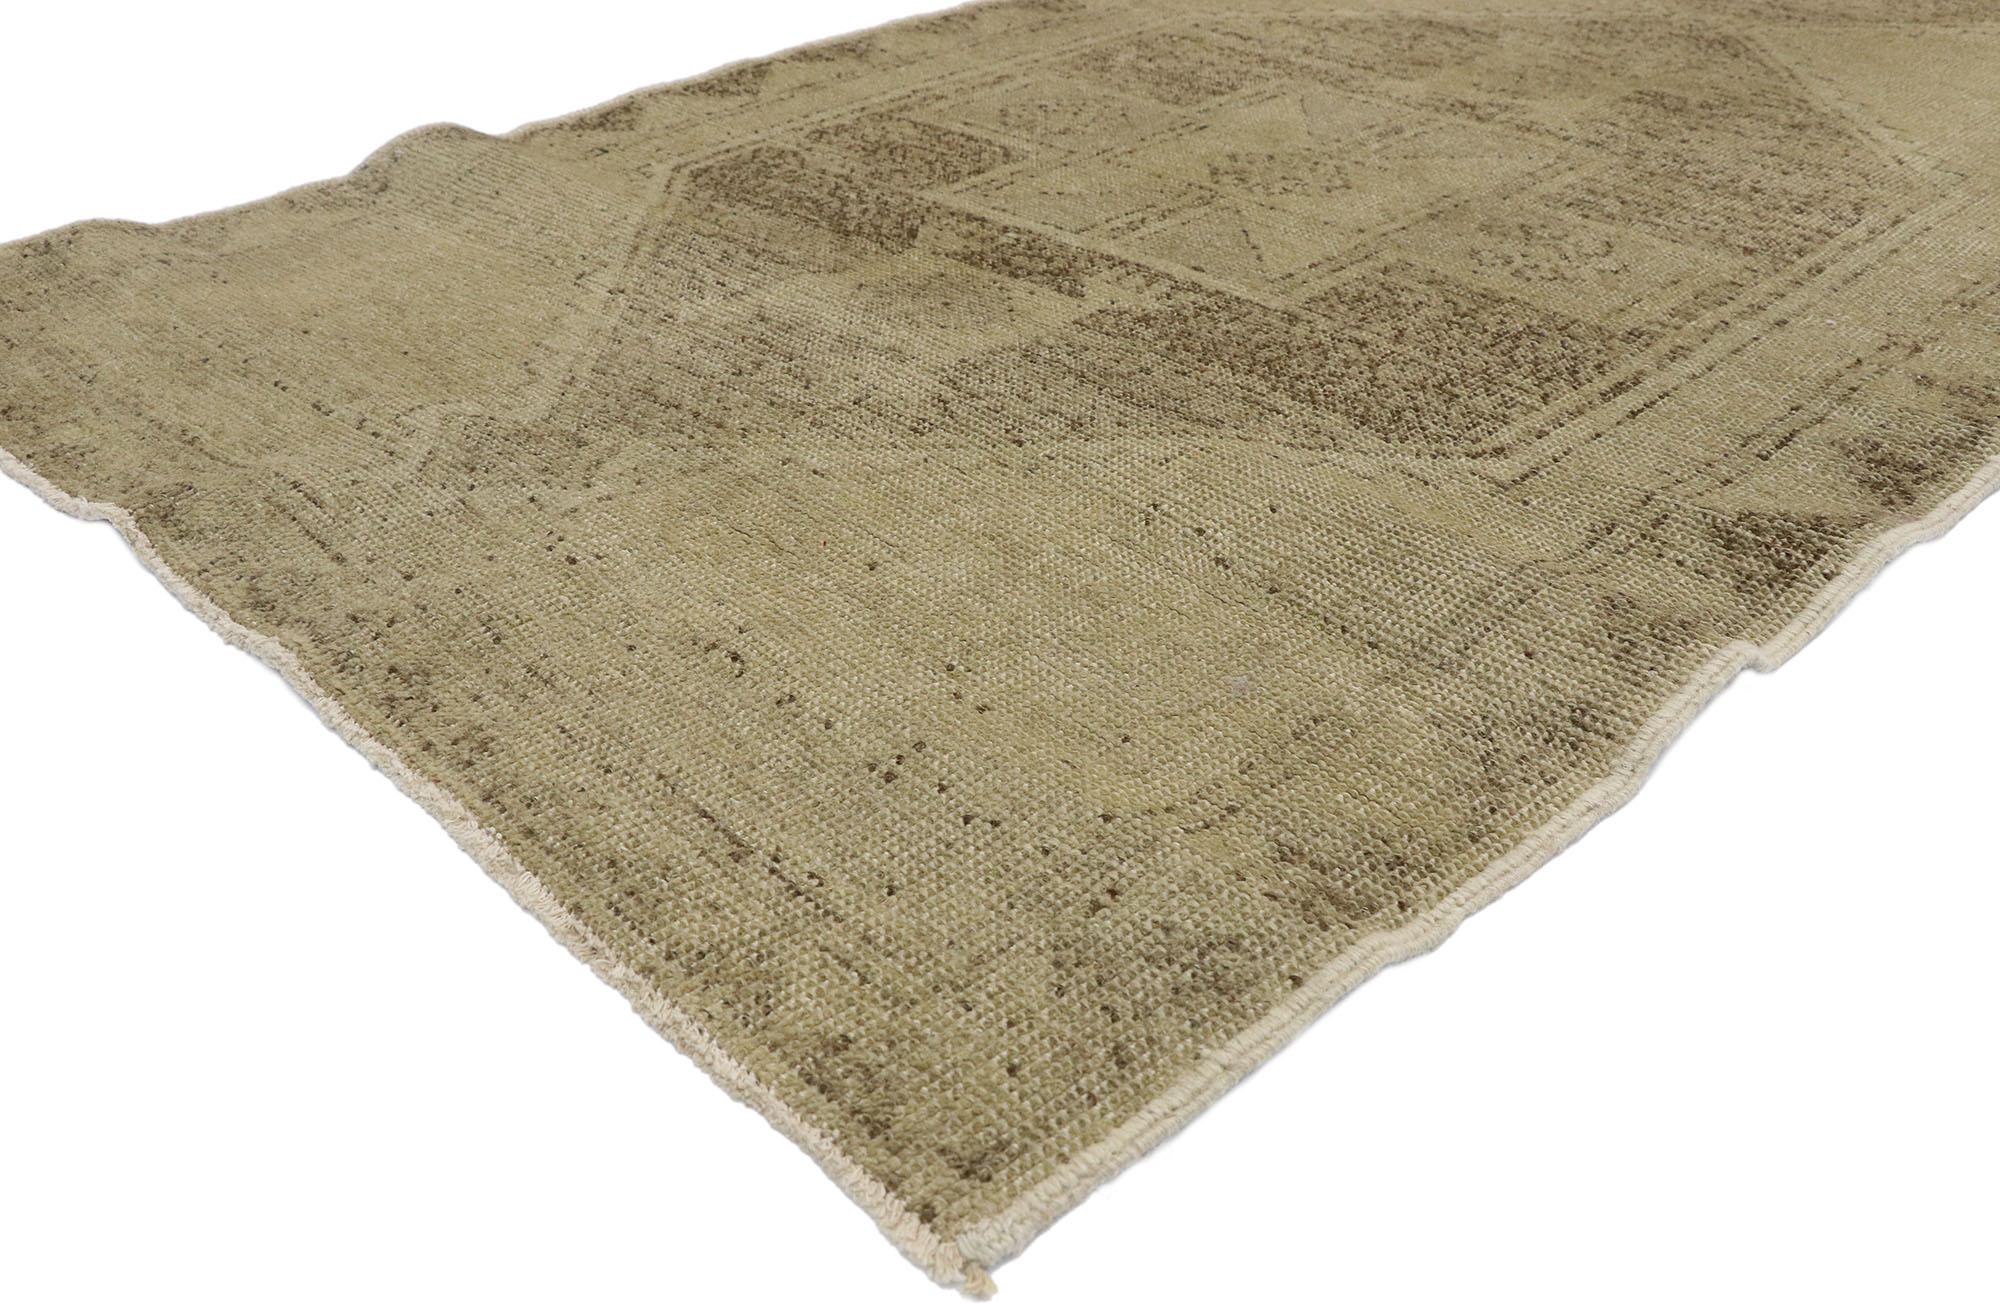 50830 Turkish Oushak Carpet Runner with Shaker Style and Muted 'Washed Out' Colors 03'06 x 12'10. This extraordinary vintage Turkish Oushak carpet runner features a modern design and muted washed out colors. The dramatic, yet simple geometric motifs